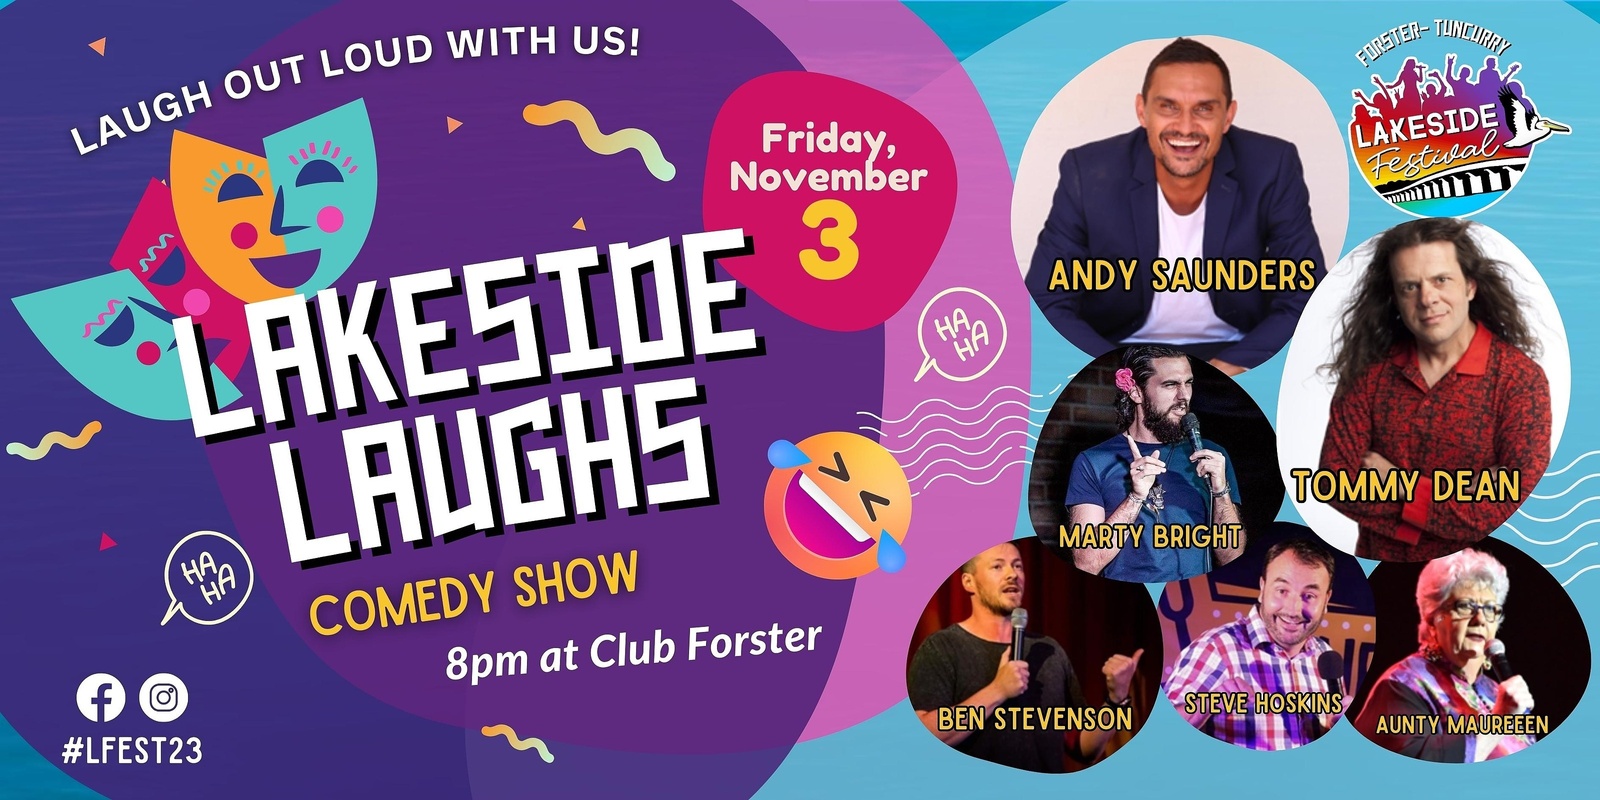 Banner image for Lakeside Laughs